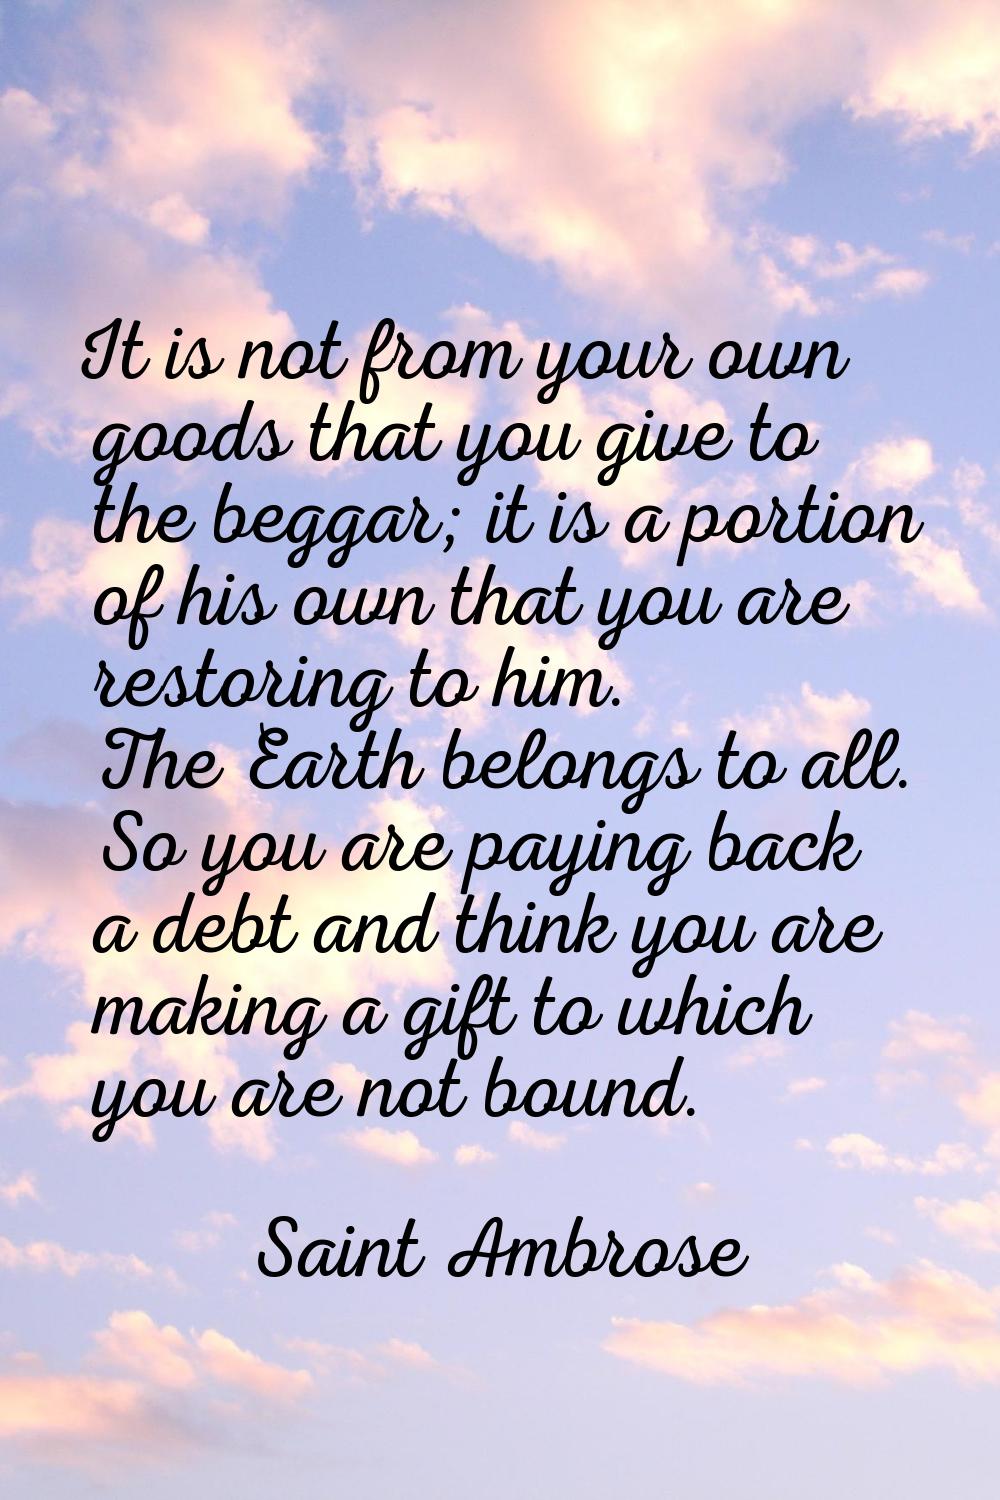 It is not from your own goods that you give to the beggar; it is a portion of his own that you are 